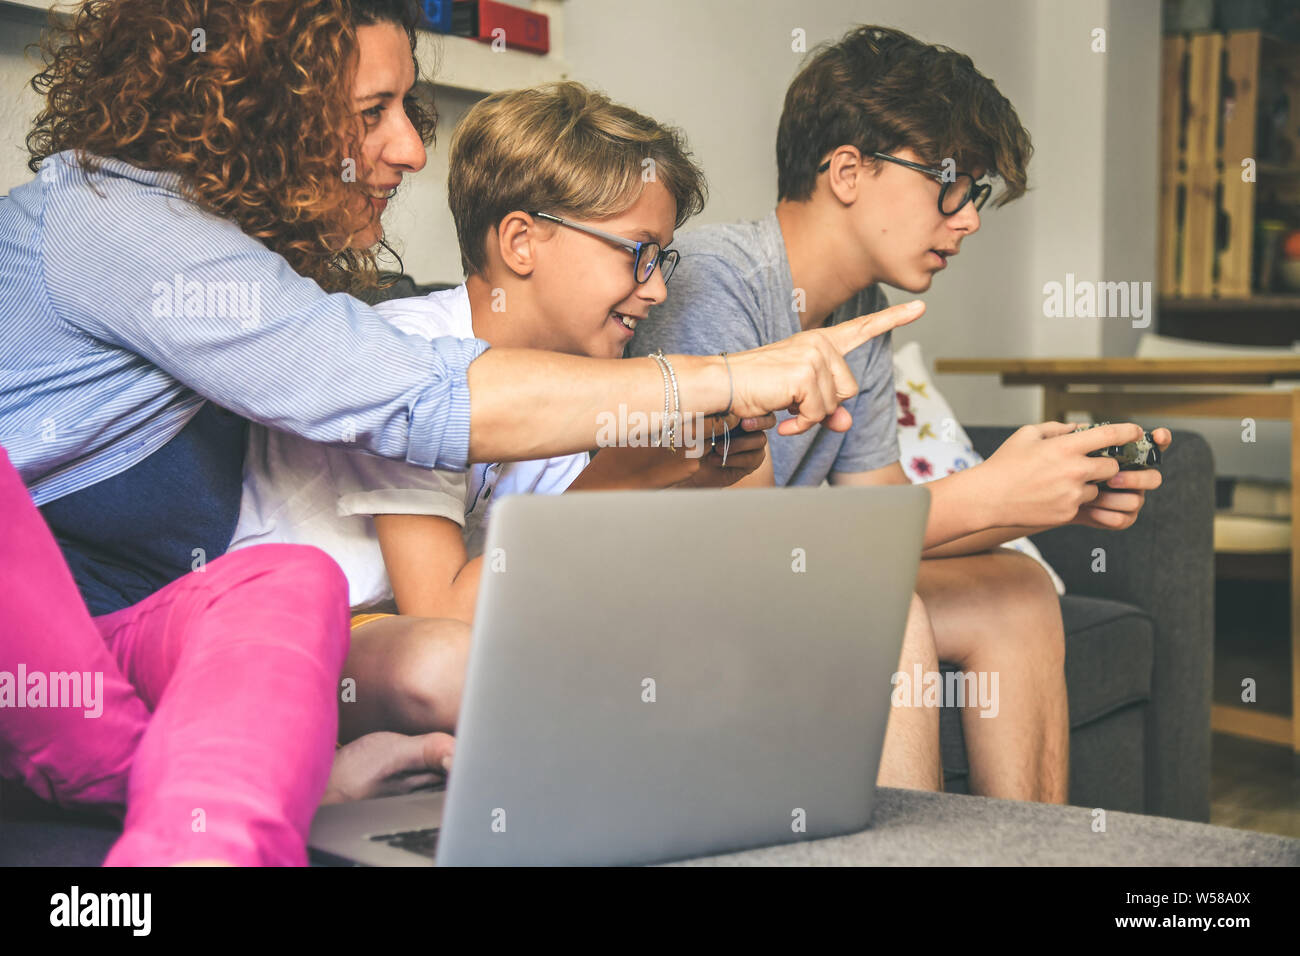 Family sitting on sofà at home using game console. Mother smiling with two young brothers playing video game. Gaming on line with friends anywhere. Be Stock Photo